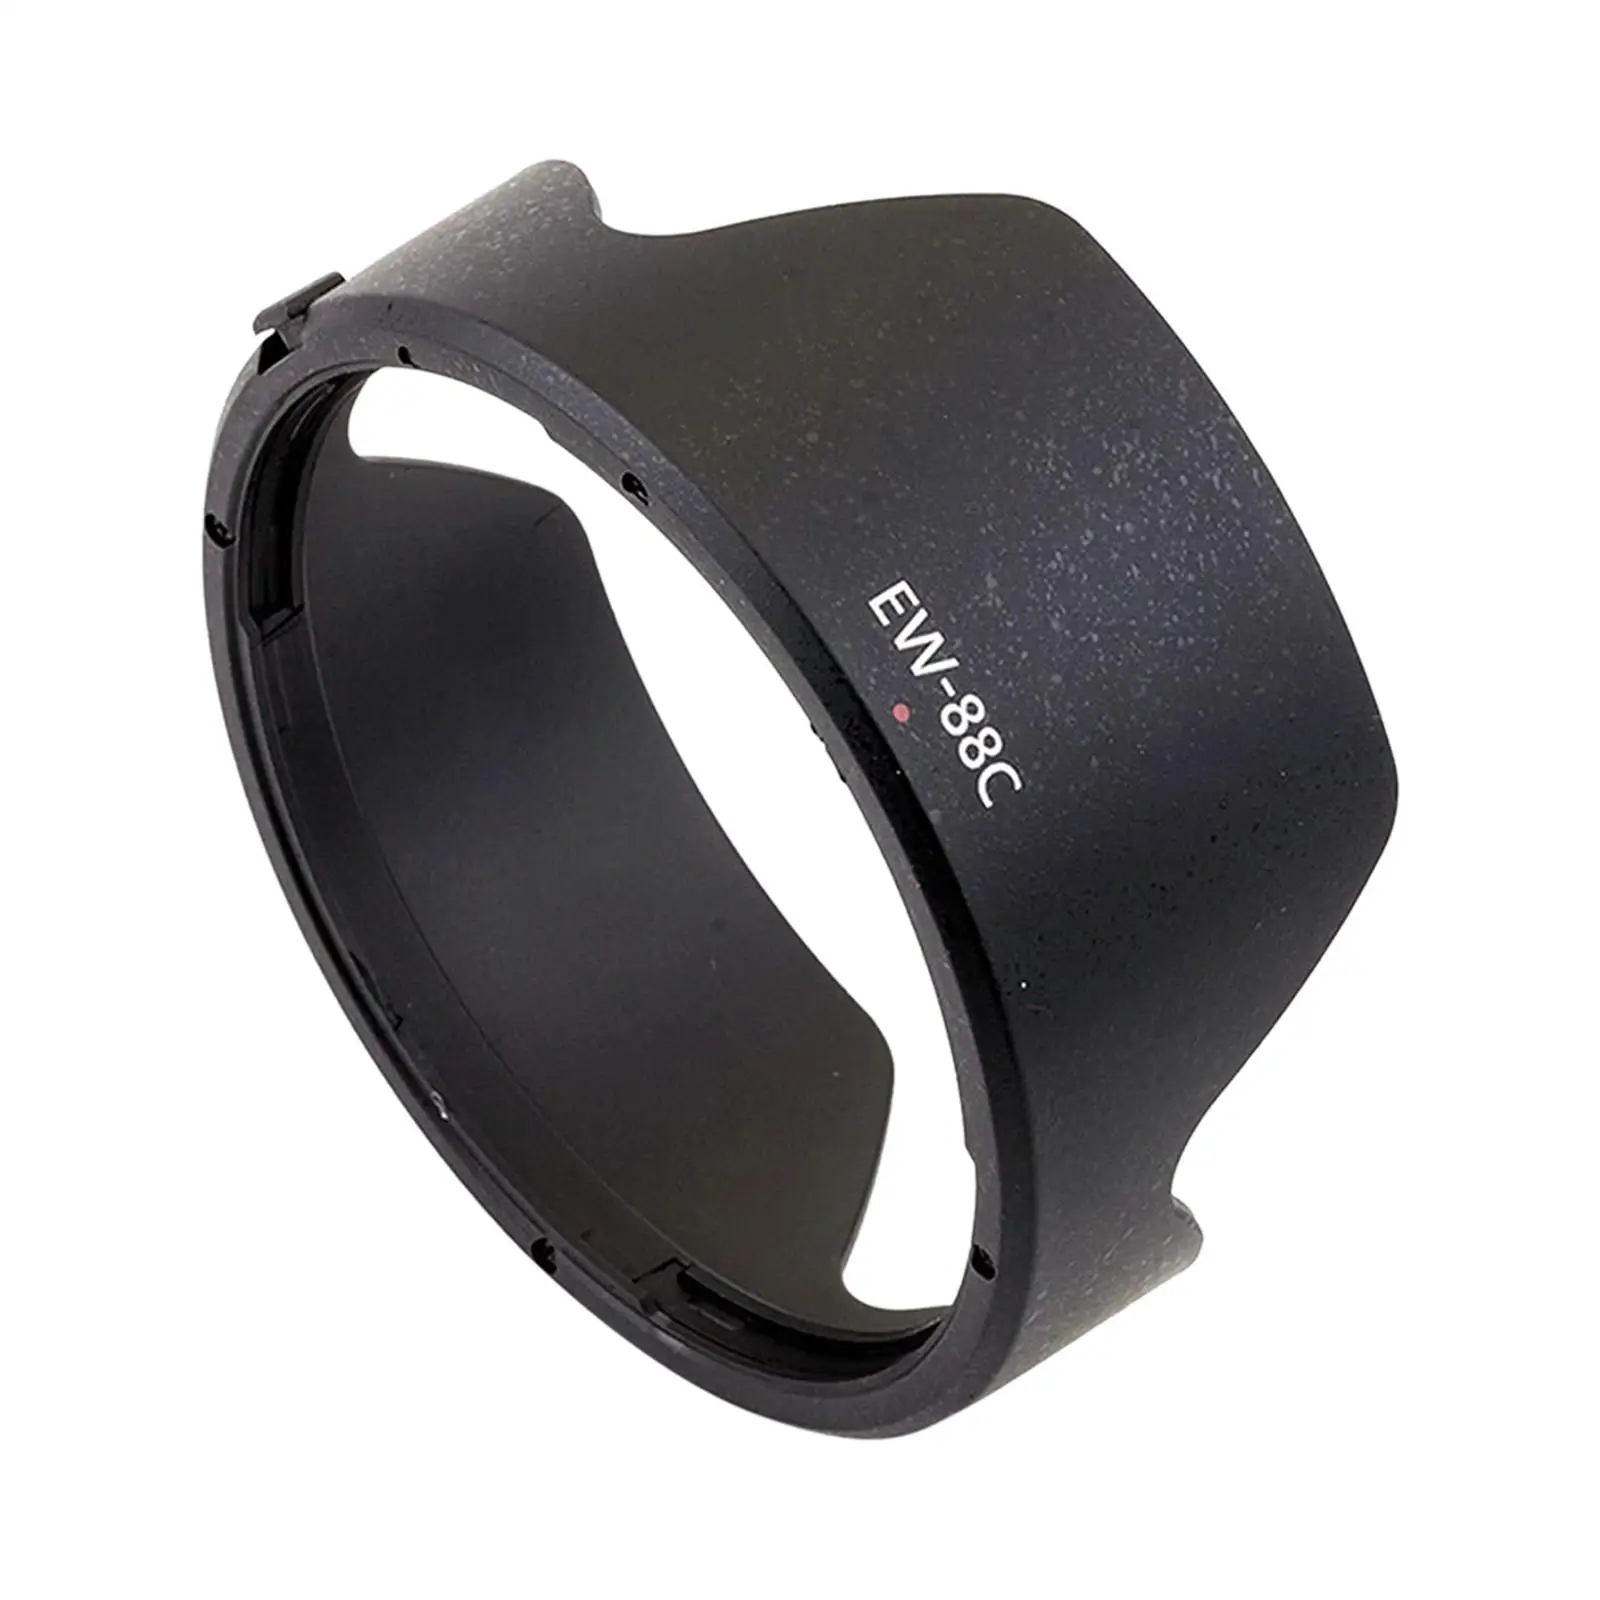 Lens Hood Cover Replacement Parts Snap on Mounting Lens Hood Protector Digital Camera for EW-88C 24-70F2.8II 6D 5D3 5D4